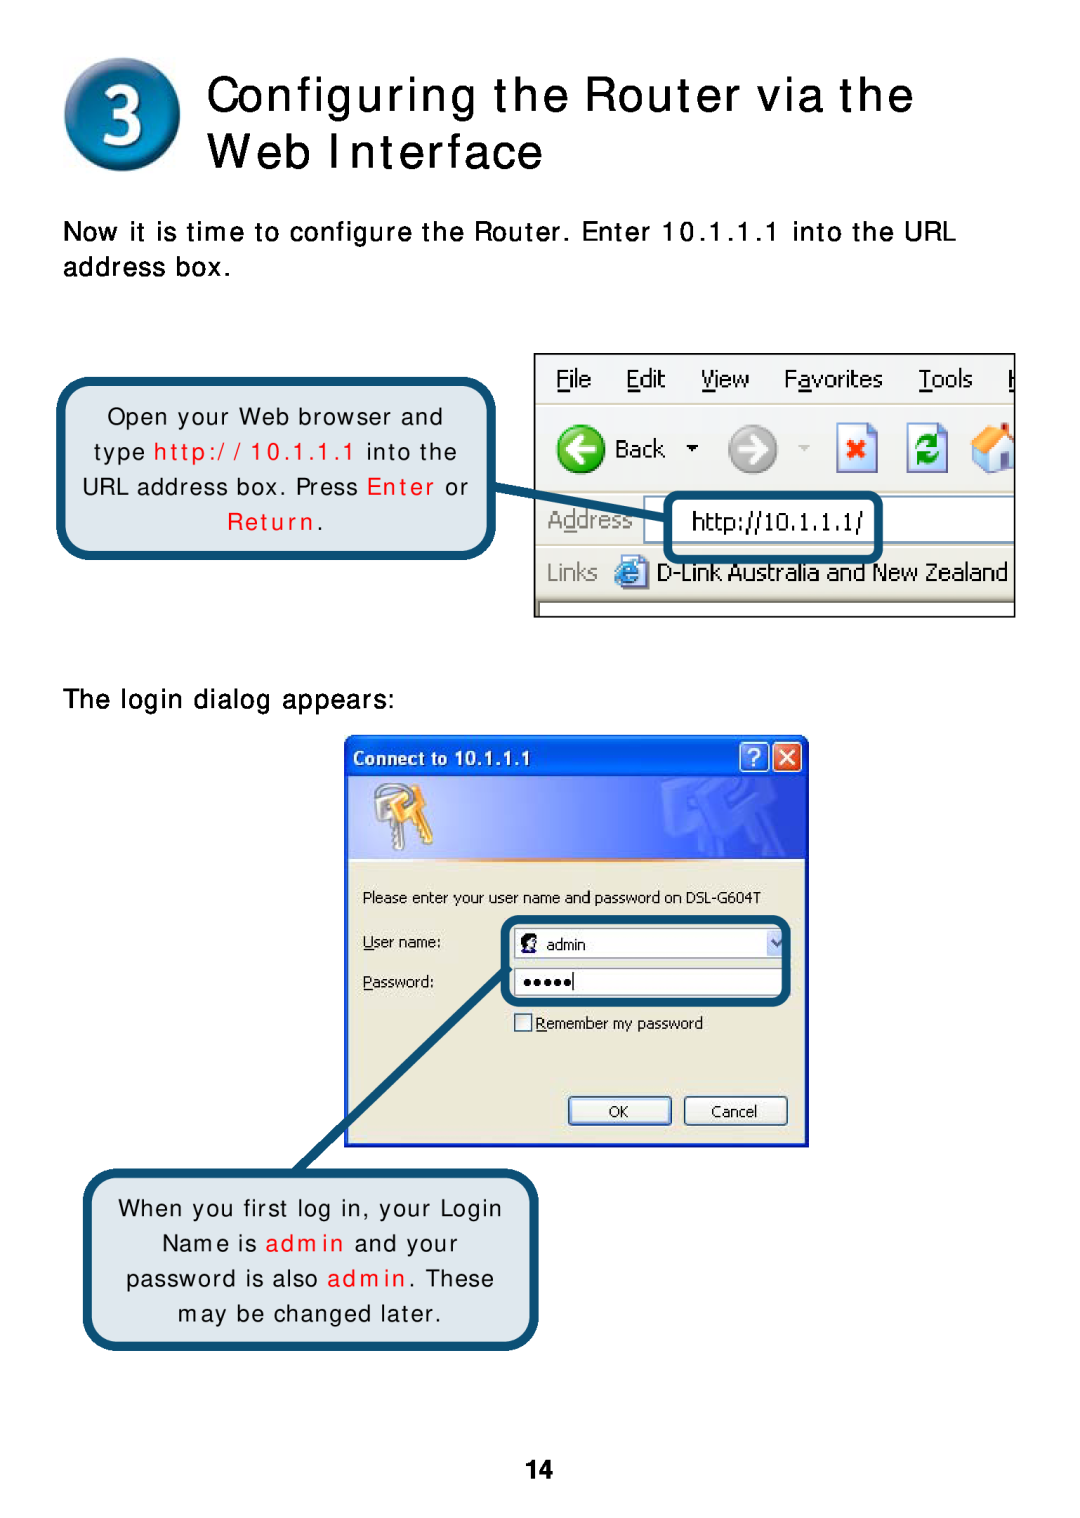 D-Link DSL-G604T specifications Configuring the Router via the Web Interface, The login dialog appears 